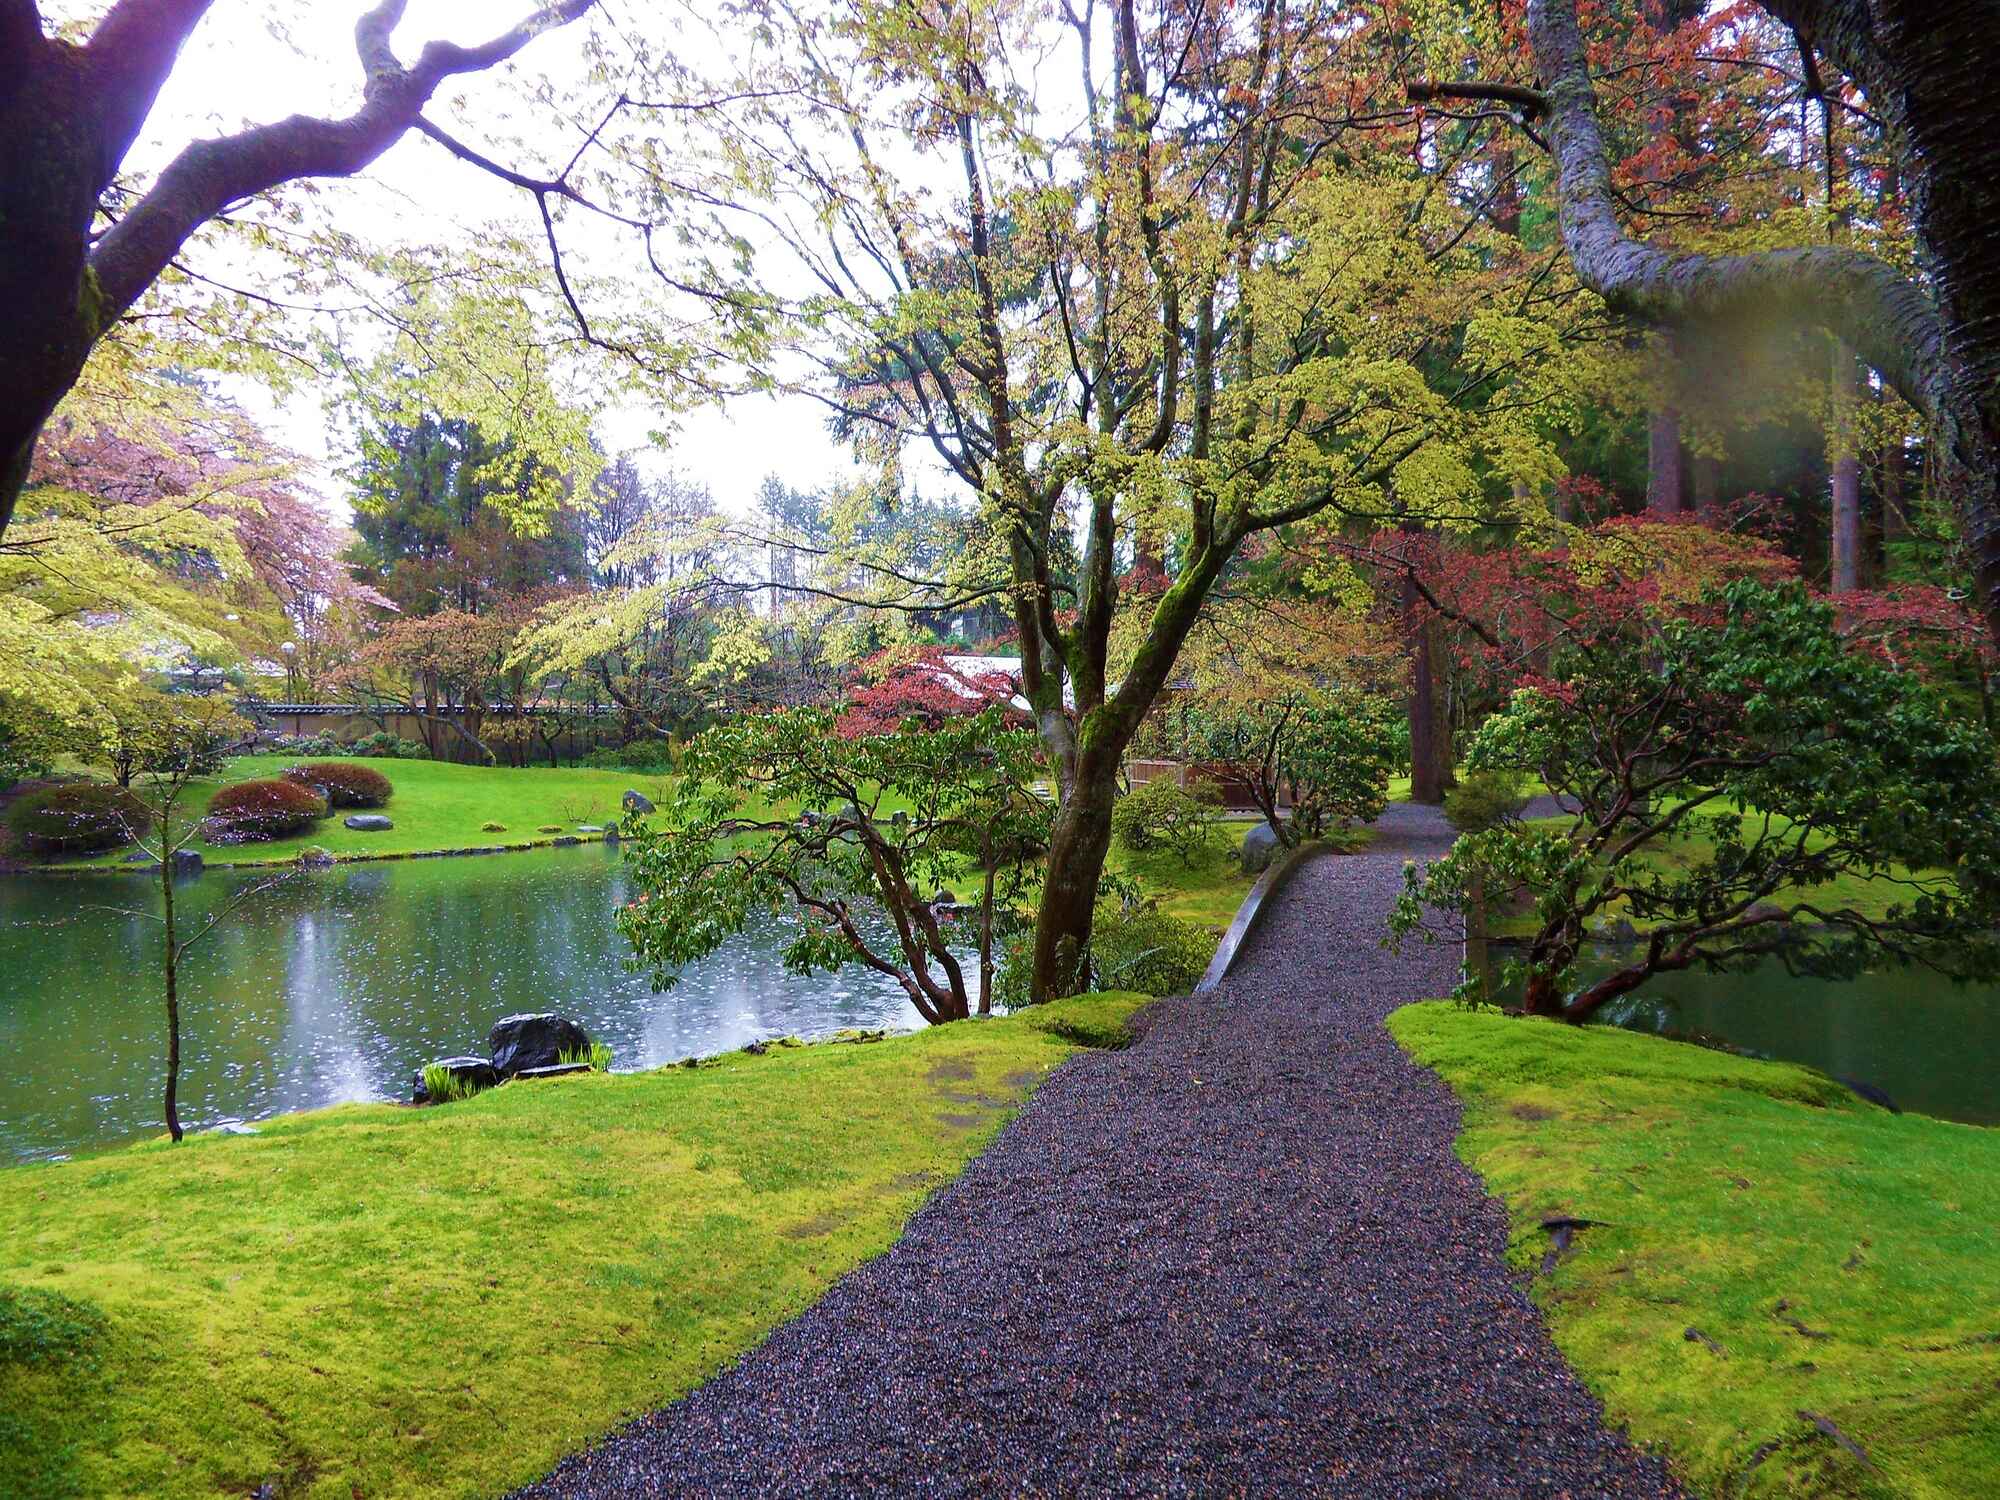 Photograph of a Japanese-style garden in Vancouver, Canada, that has a moss lawn. The photo shows a moss lawn bordering either side of a gravel path. Water can be seen off to the left. Trees and shrubs are also growing in the garden.